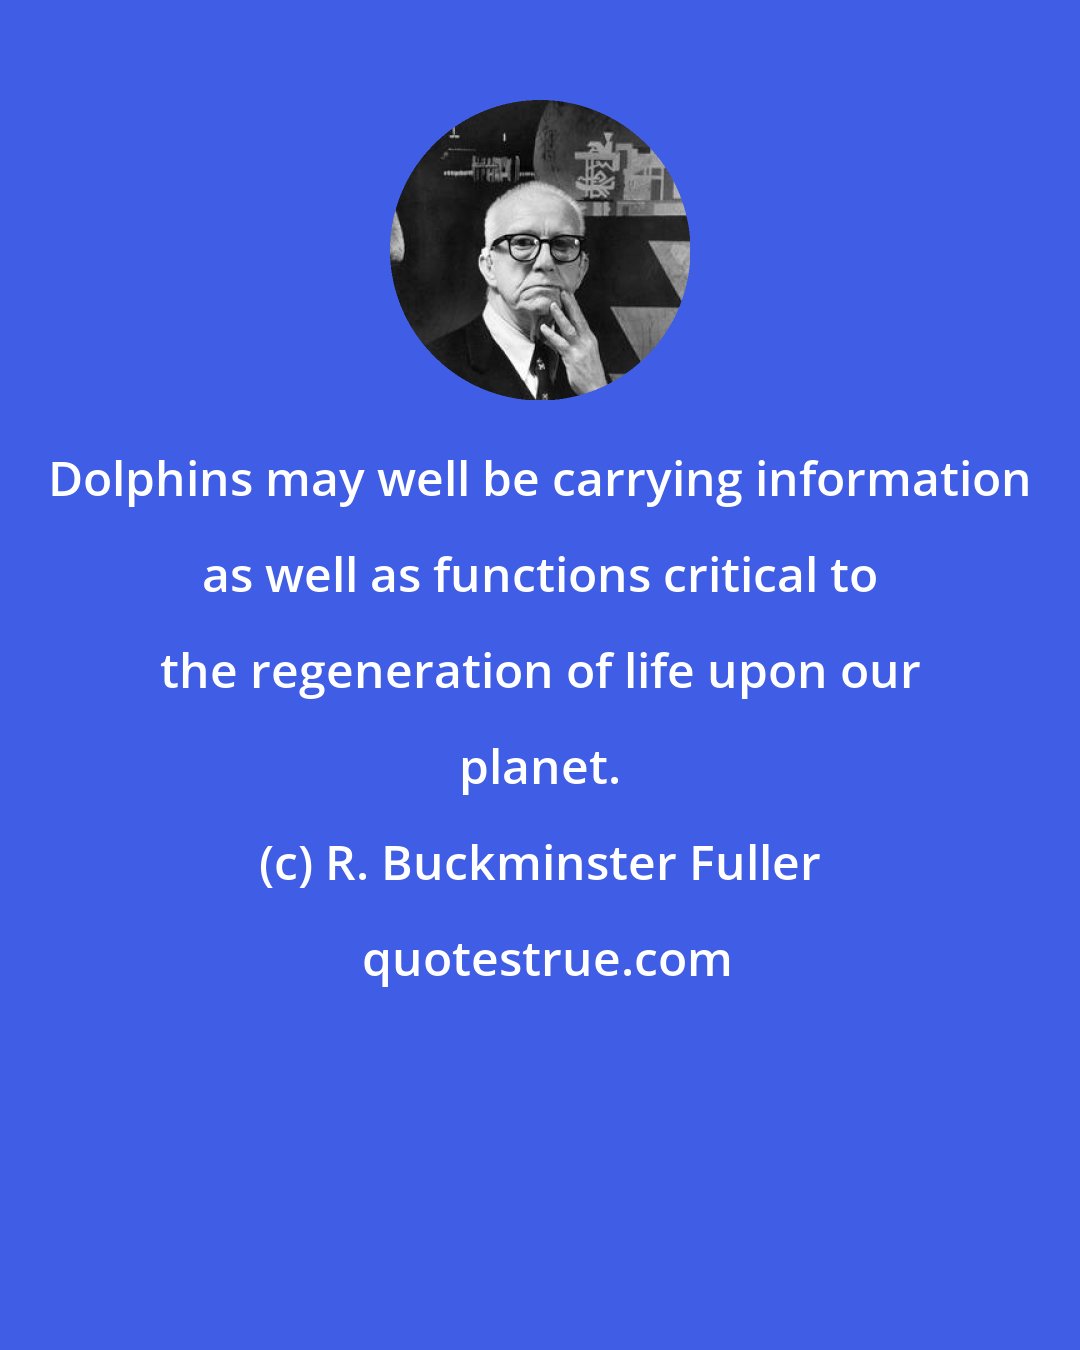 R. Buckminster Fuller: Dolphins may well be carrying information as well as functions critical to the regeneration of life upon our planet.